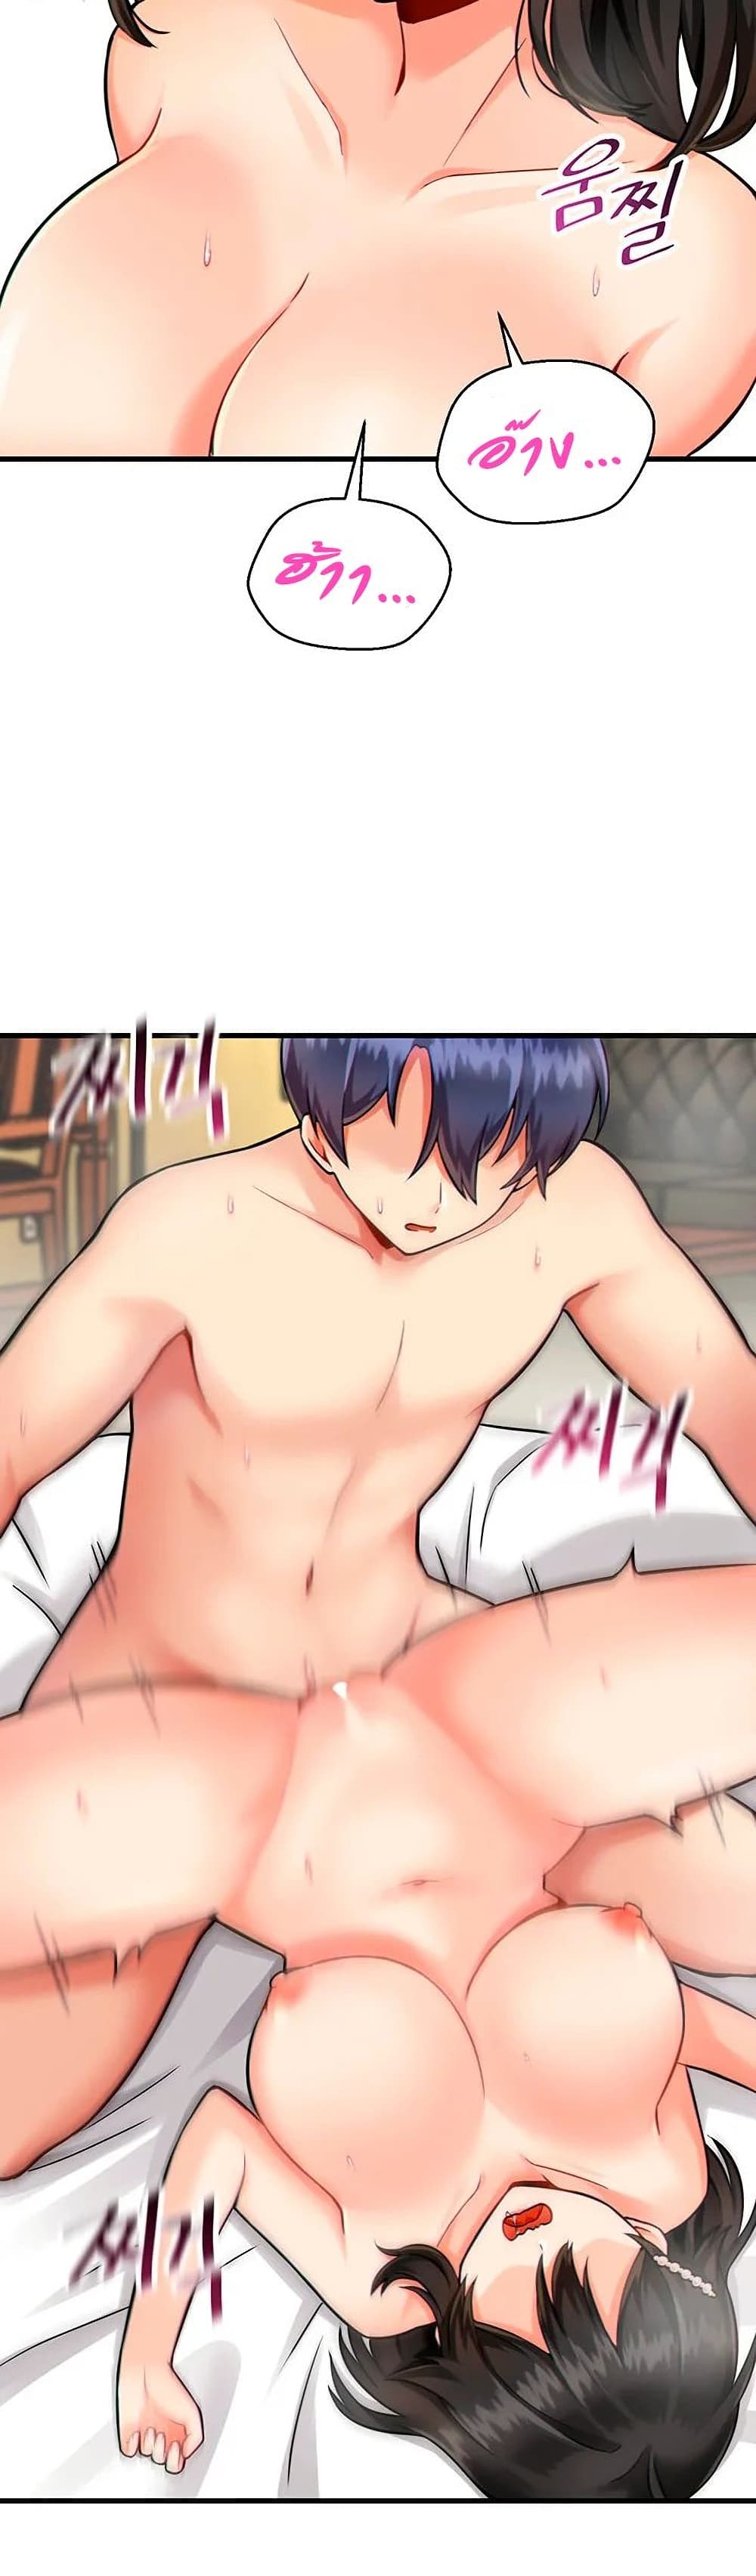 Trapped in the Academyâ€™s Eroge 11 (6)